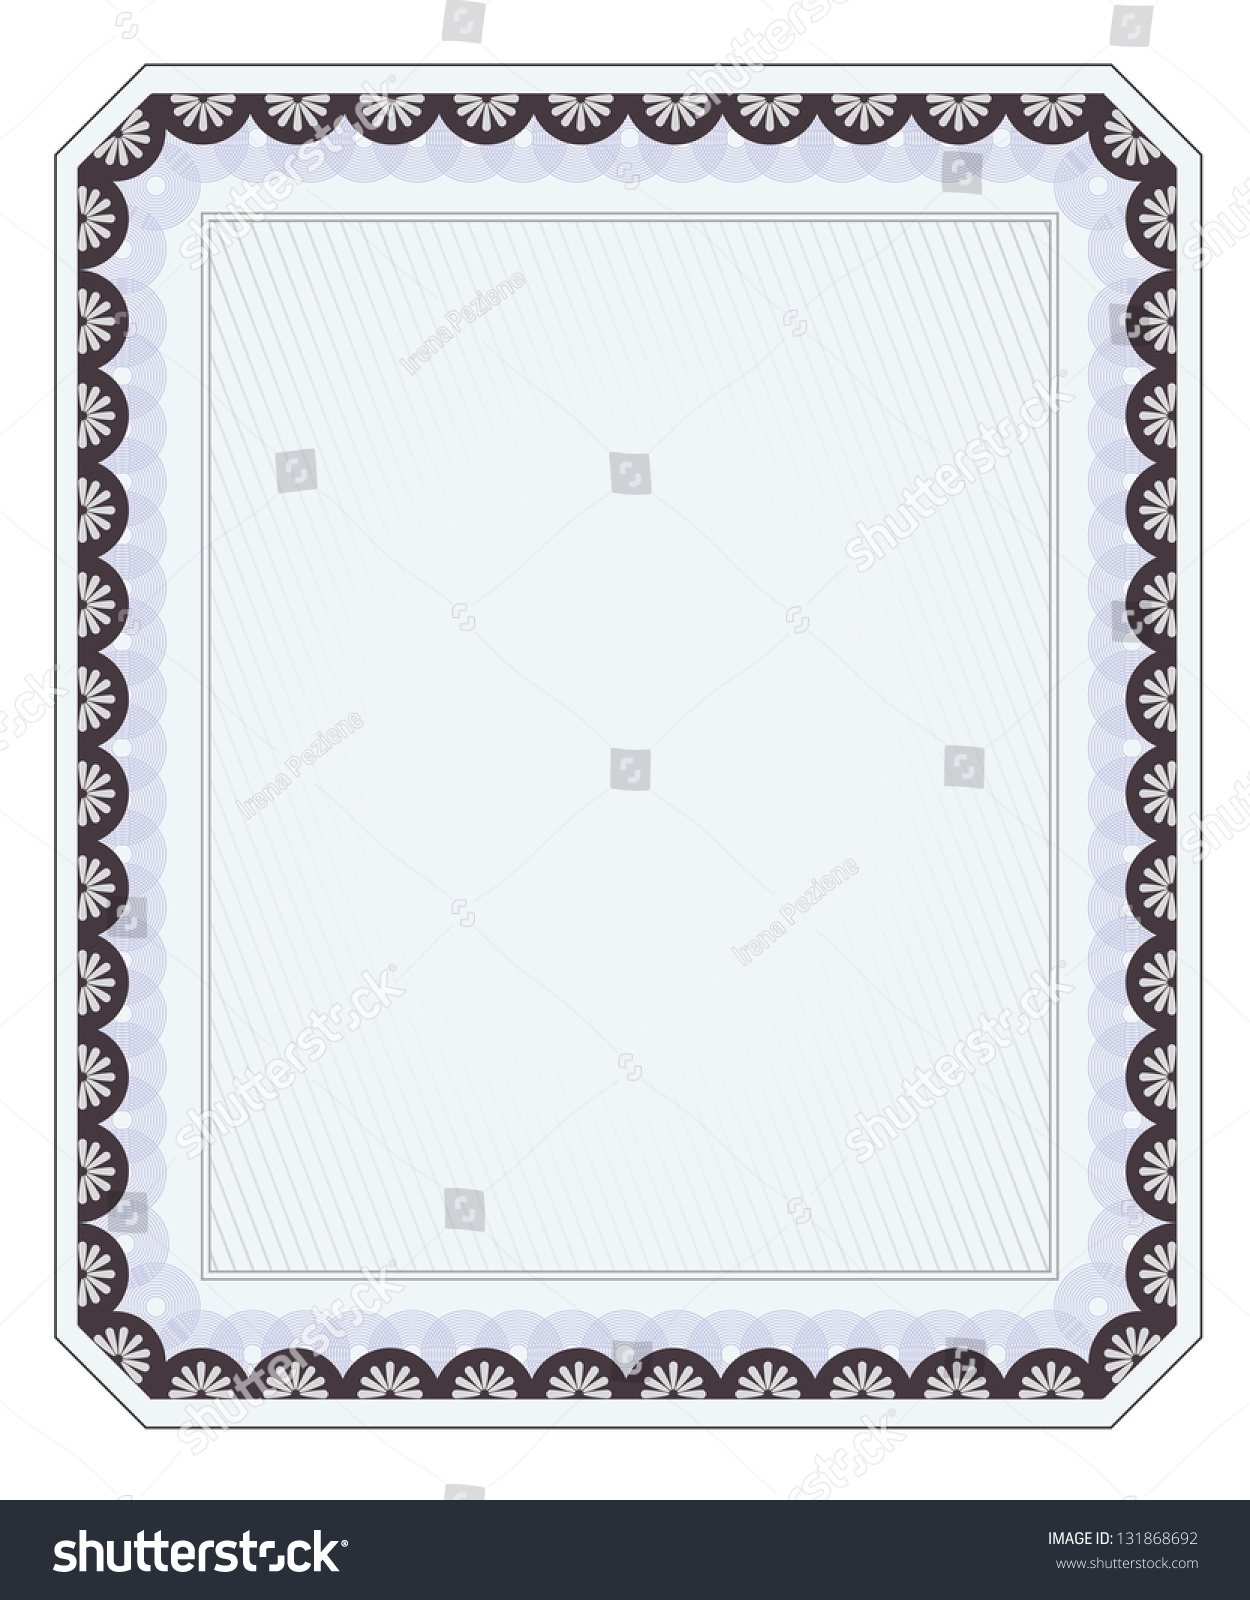 Blank Diploma Template from image.shutterstock.com